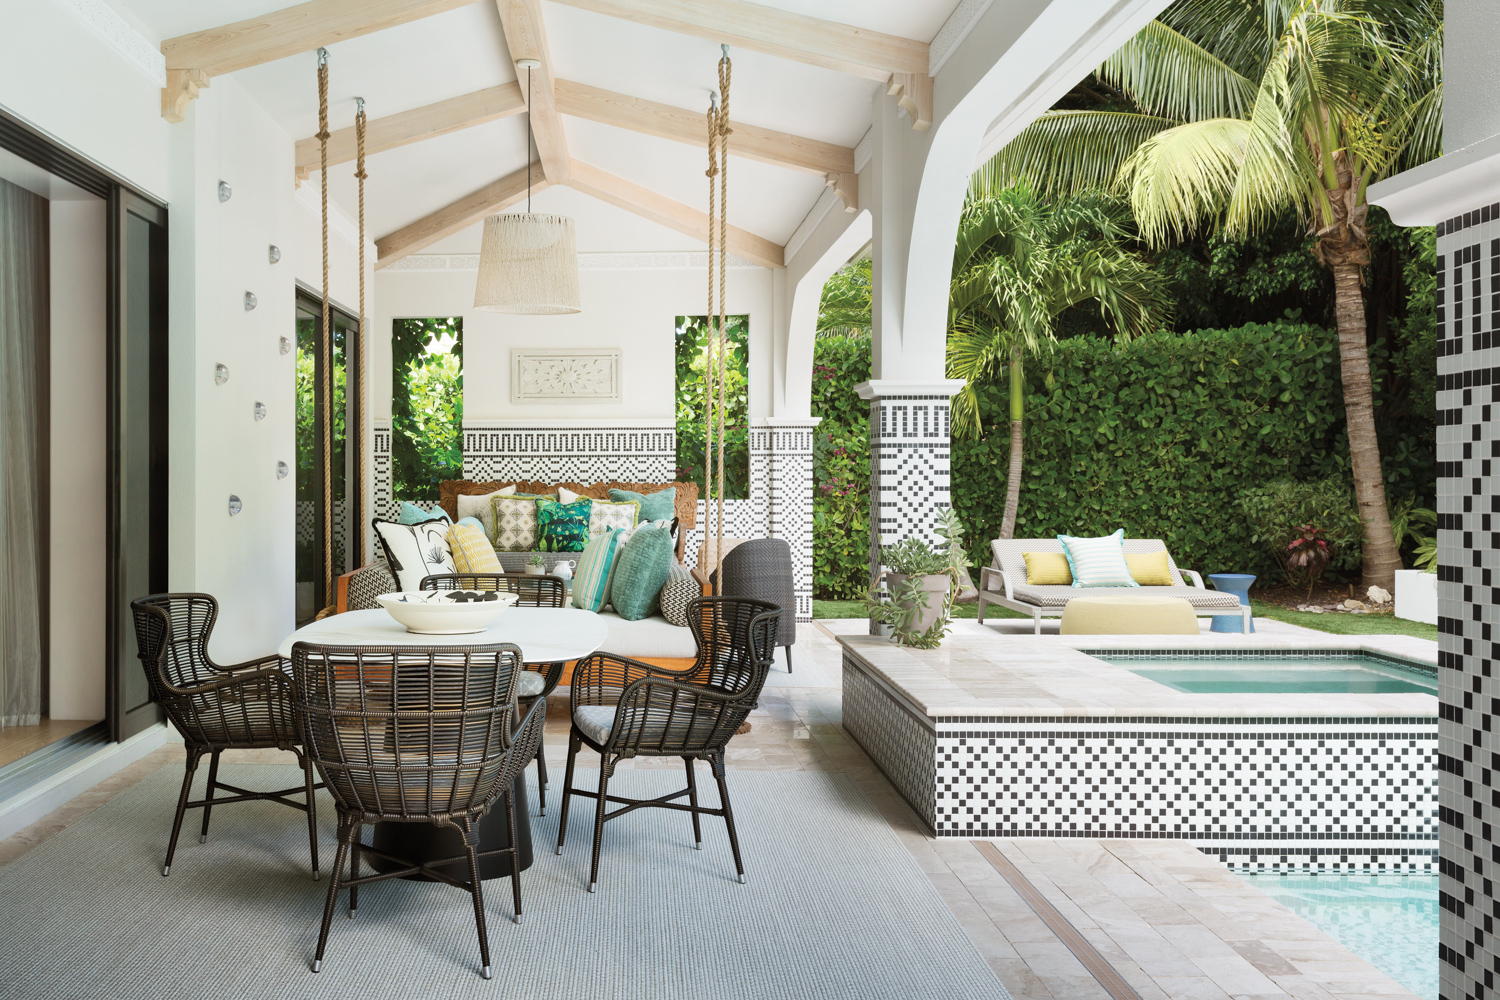 outdoor loggia with mosaic tiles, dining tables, black chairs, hanging daybed and pool